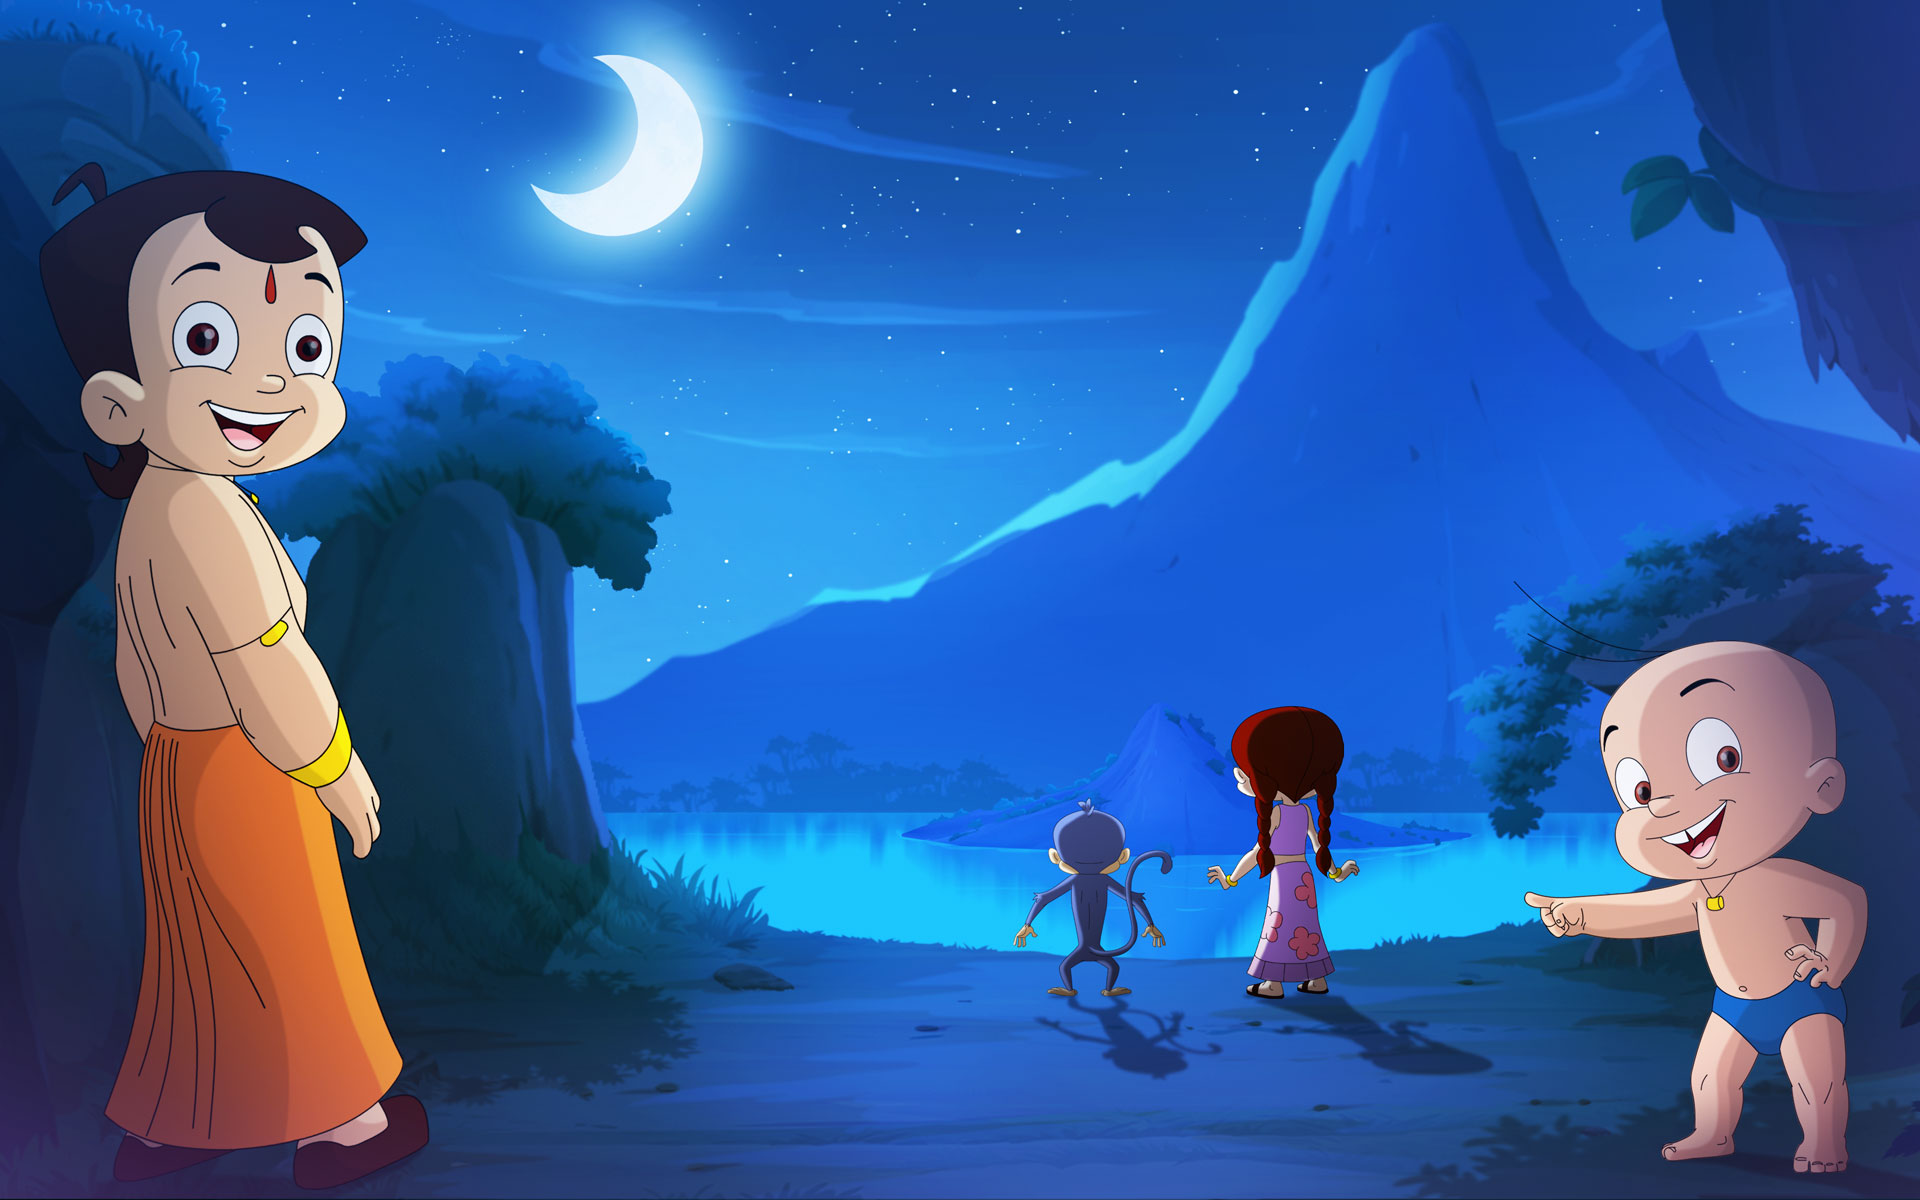  Download  Free  Full HD  Chhota Bheem Night Wallpapers  for Mobile